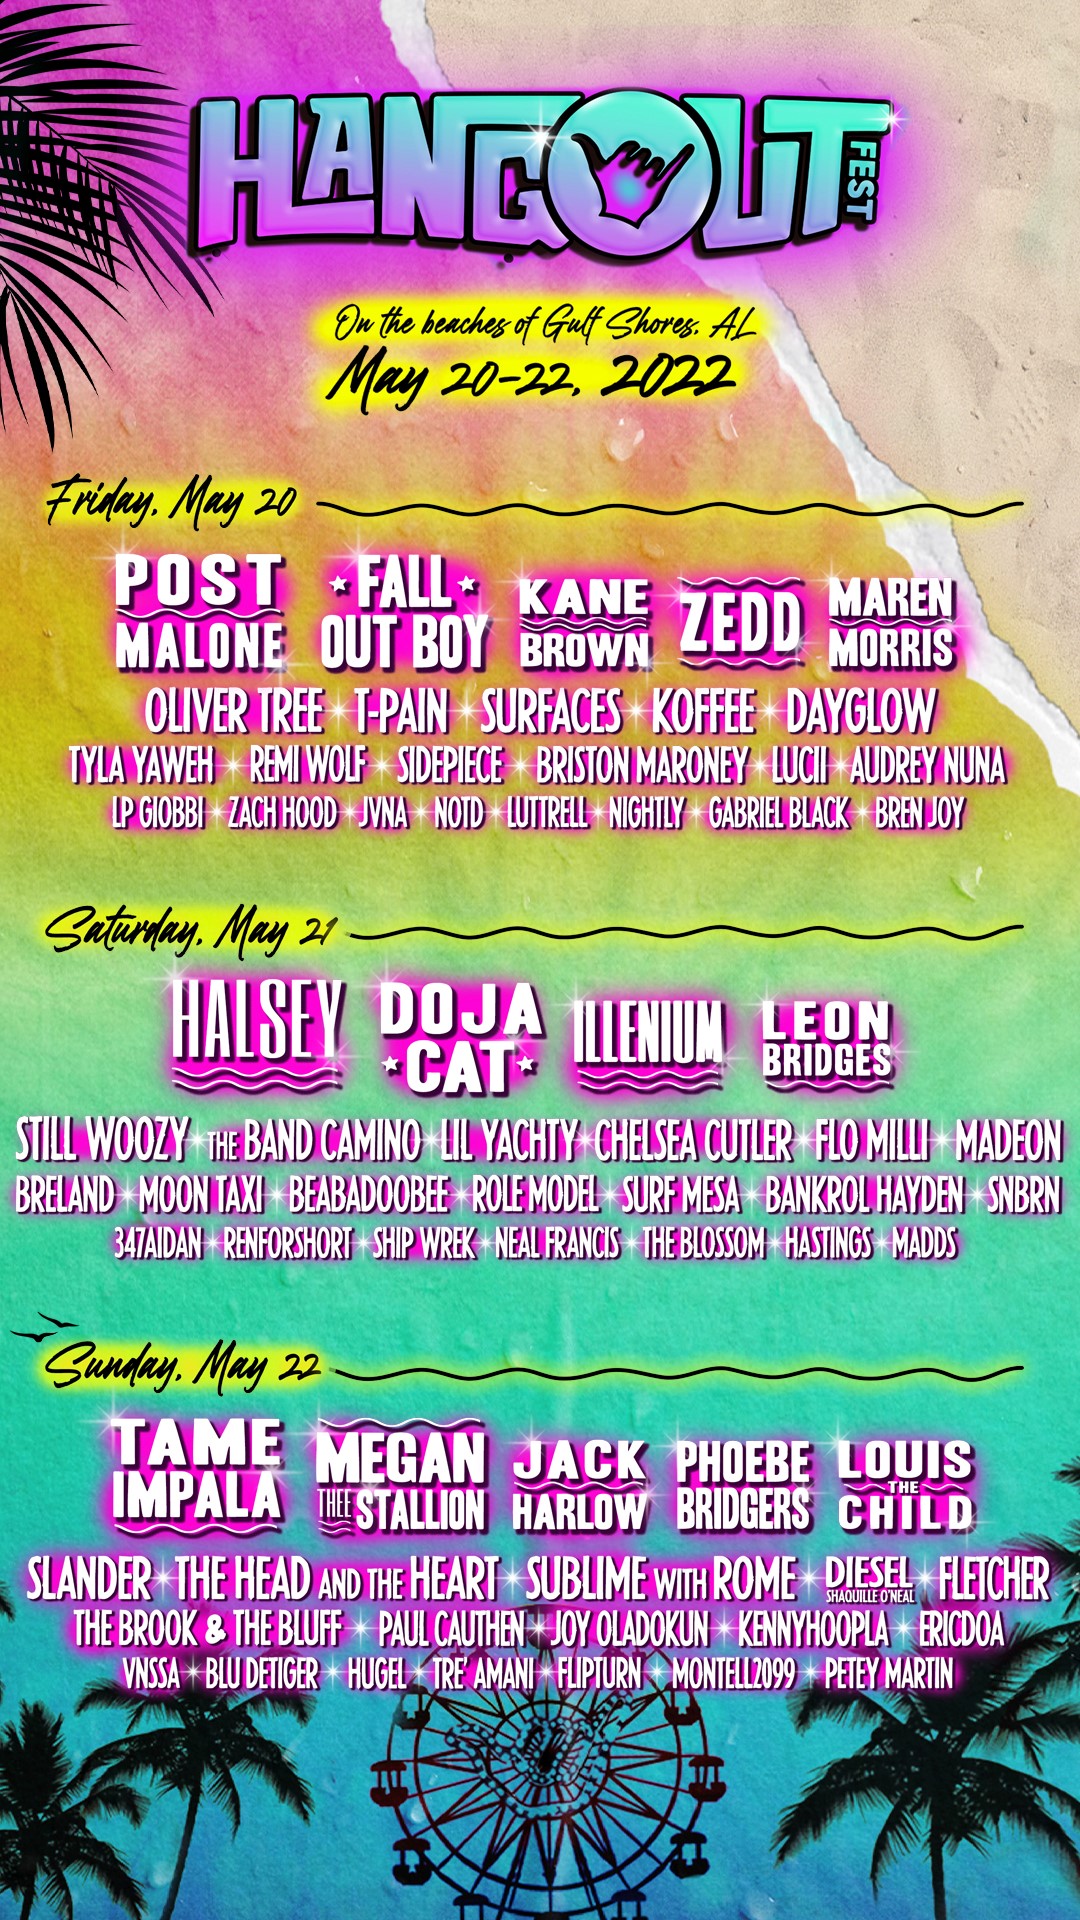 Hangout Music Festival Announces 2022 Lineup with Headliners Post